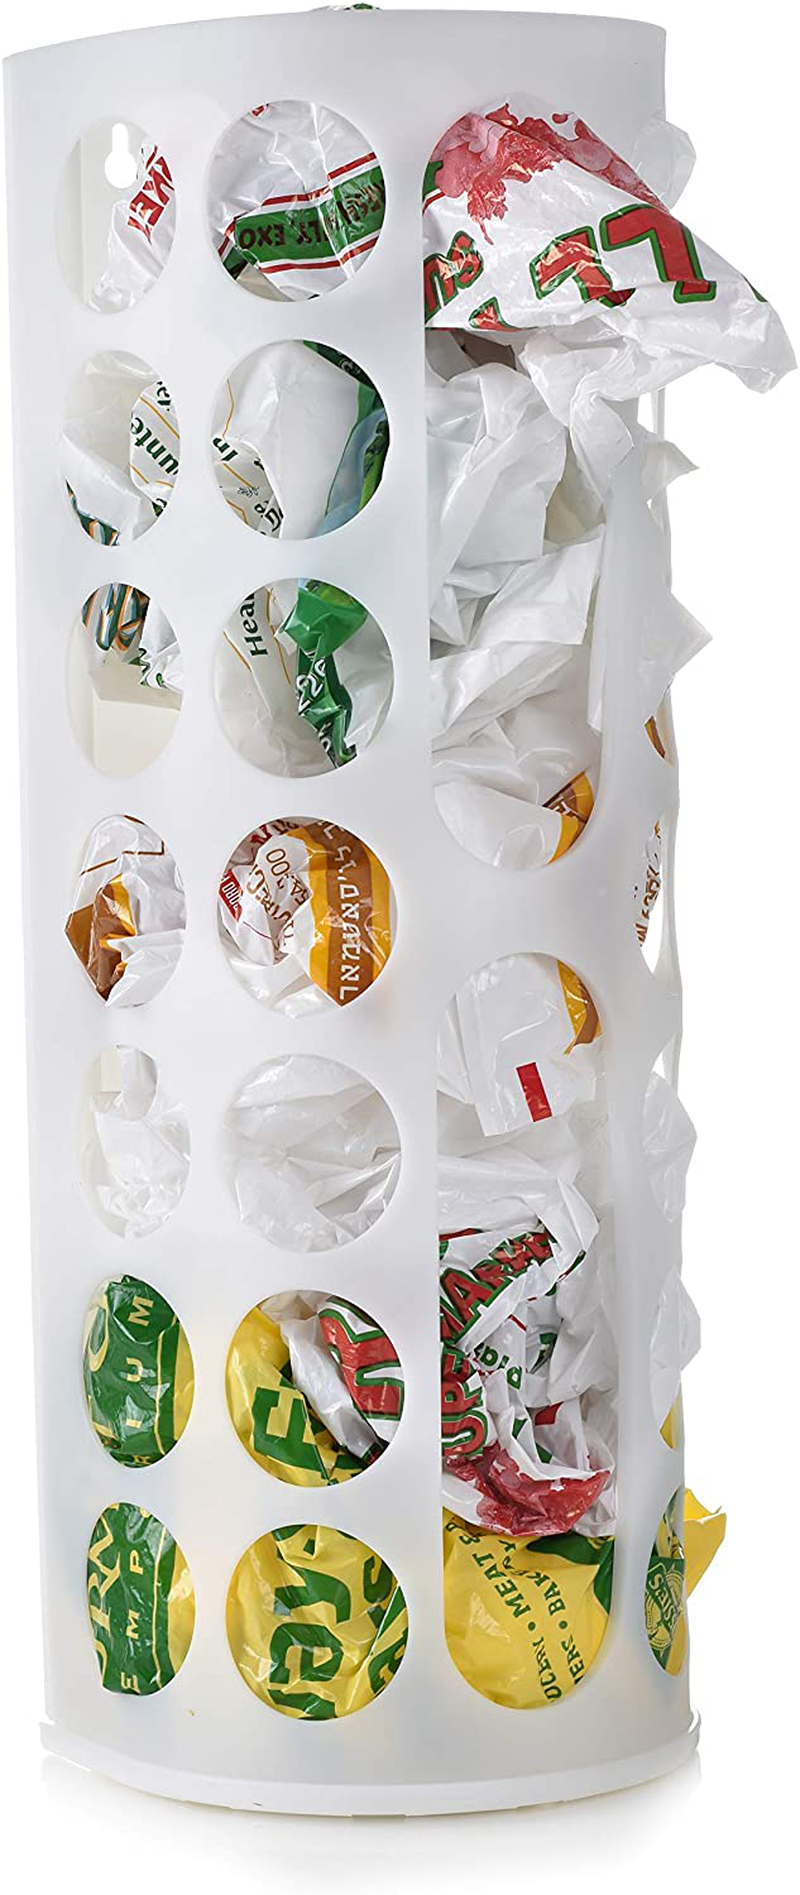 Grocery Bag Storage Holder - This Large Capacity Bag Dispenser Will Neatly Store Plastic Shopping Bags and Keep Them Handy for Reuse. Access Holes Make Adding or Retrieving Bags Simple and Convenient. Home & Garden > Kitchen & Dining > Food Storage Handy Laundry 1  